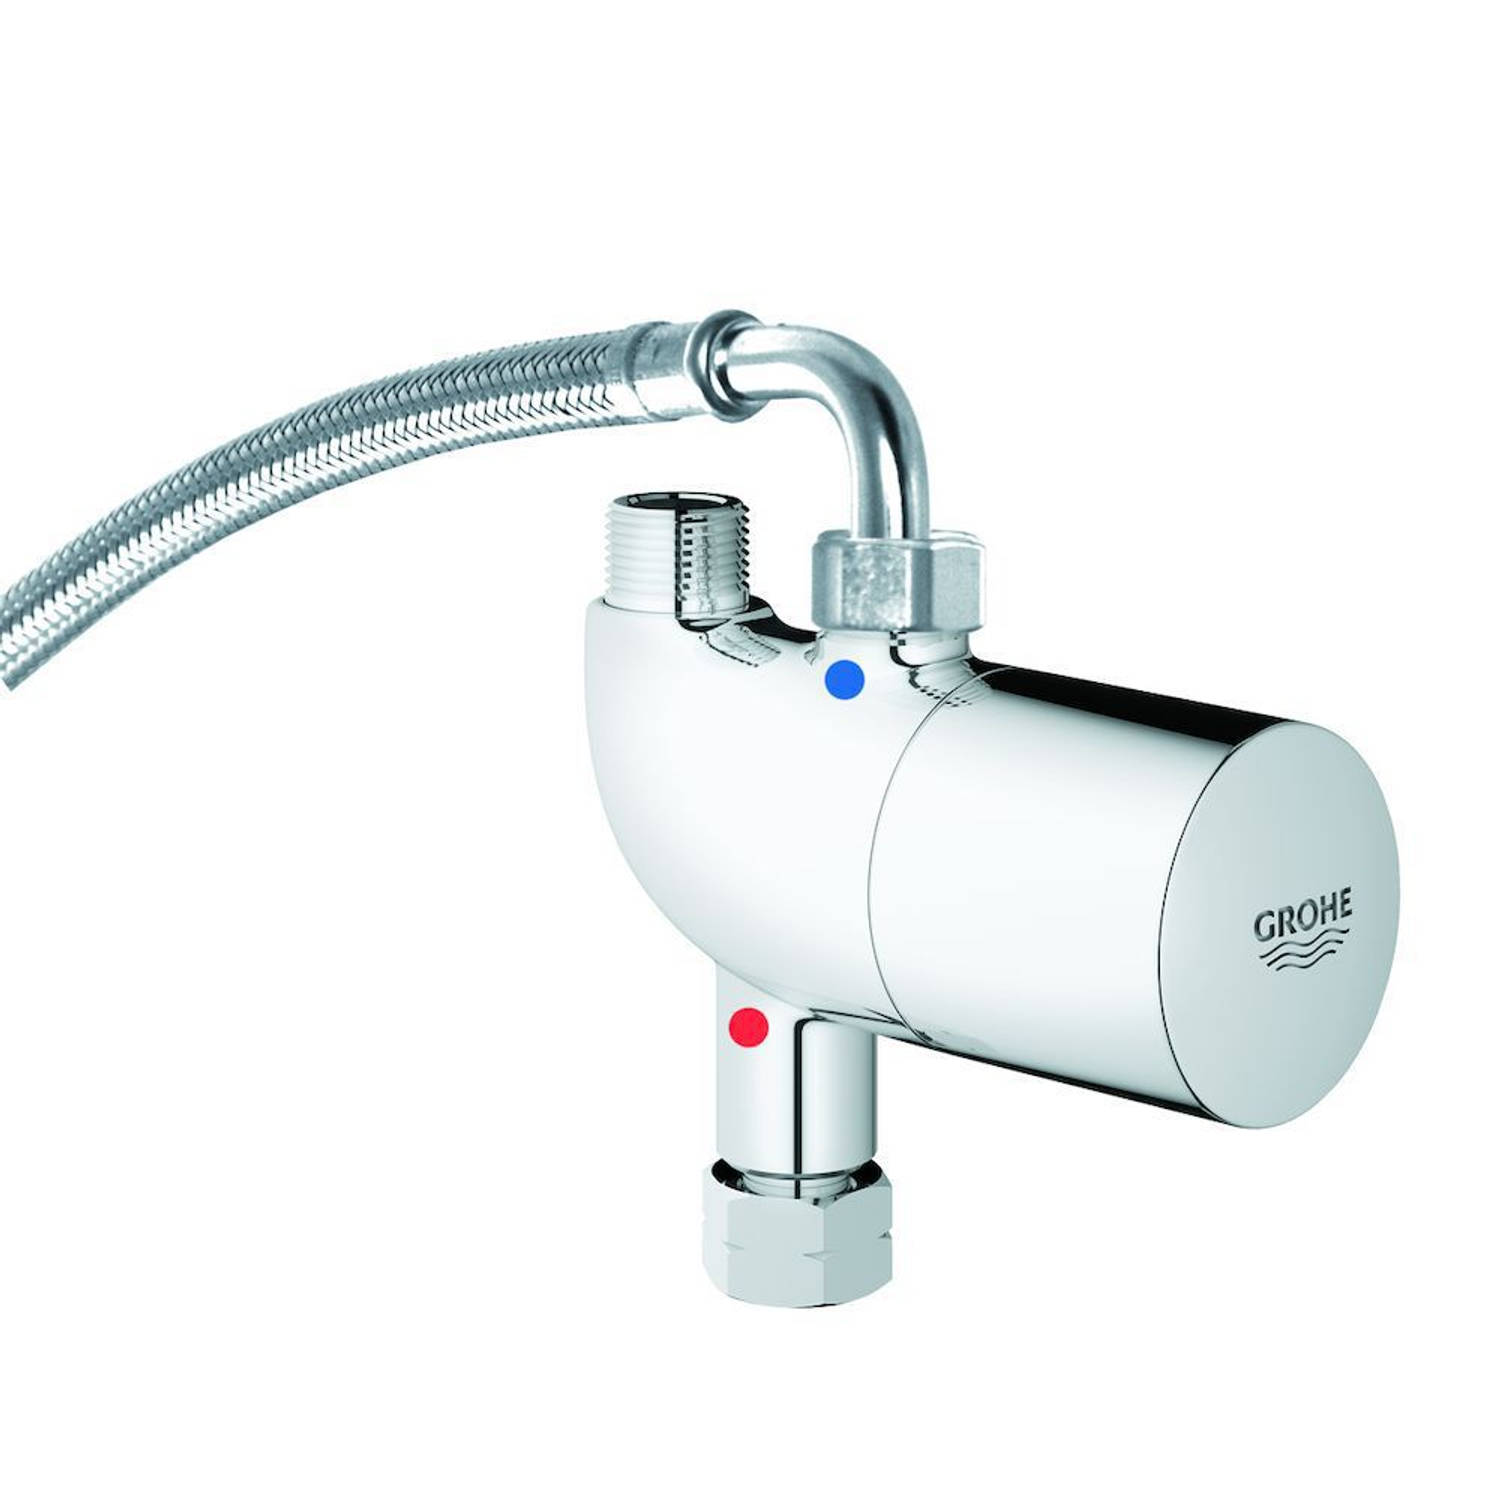 Grohe Grohtherm onderbouw thermostaat, chroom